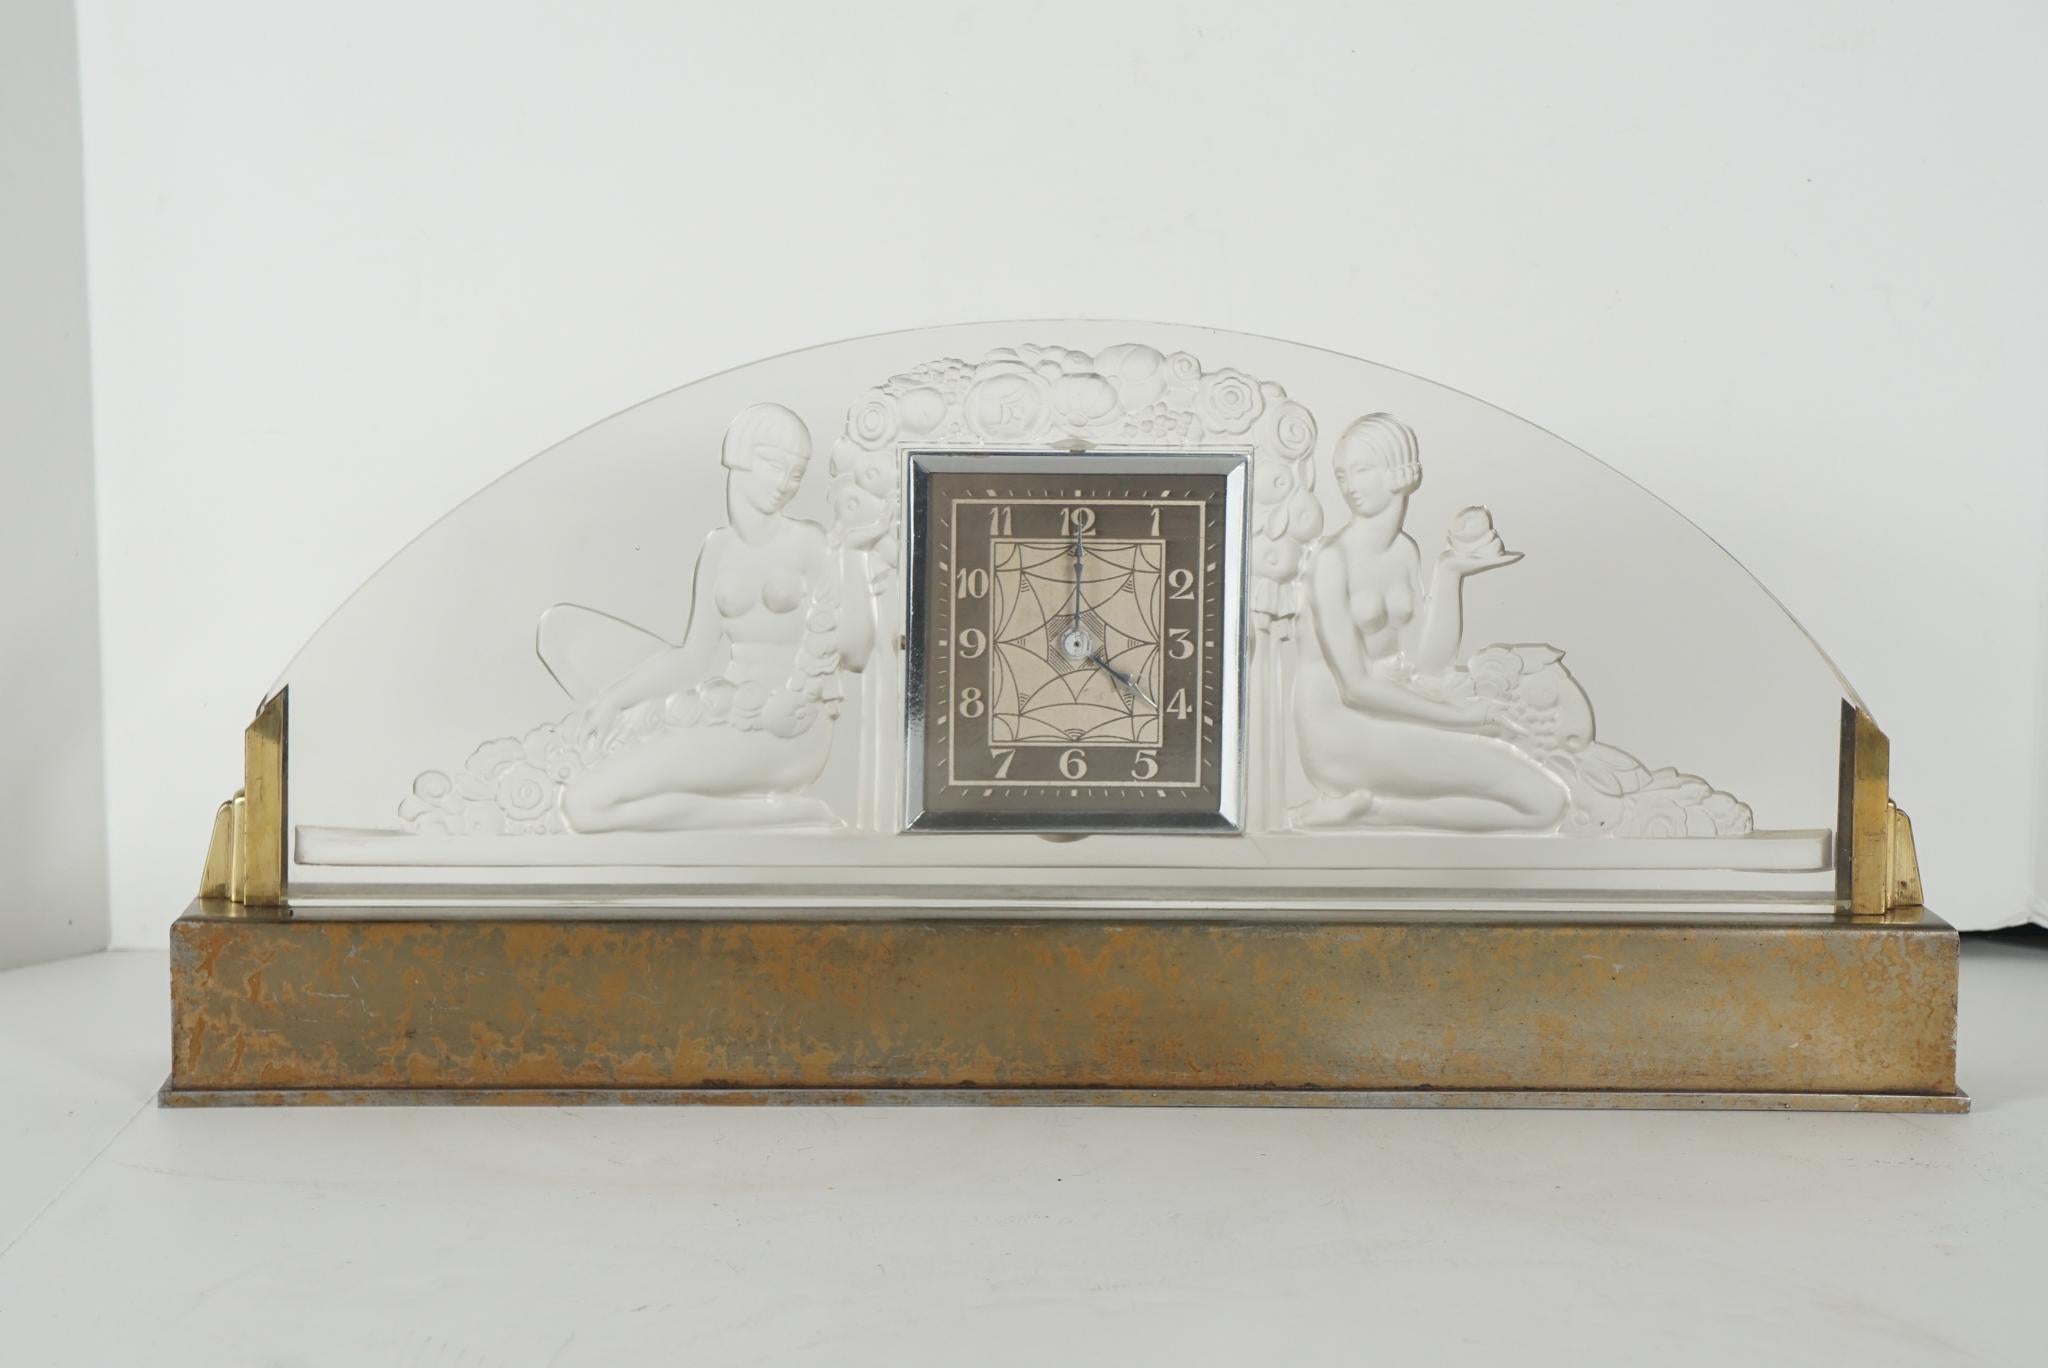 This fine period French clock was manufactured by the Sabino firm most likely before 1935. It prominently features two female nude figures lounging on either side of the inset silvered clock topped by a deco stylized garden of roses. This glass